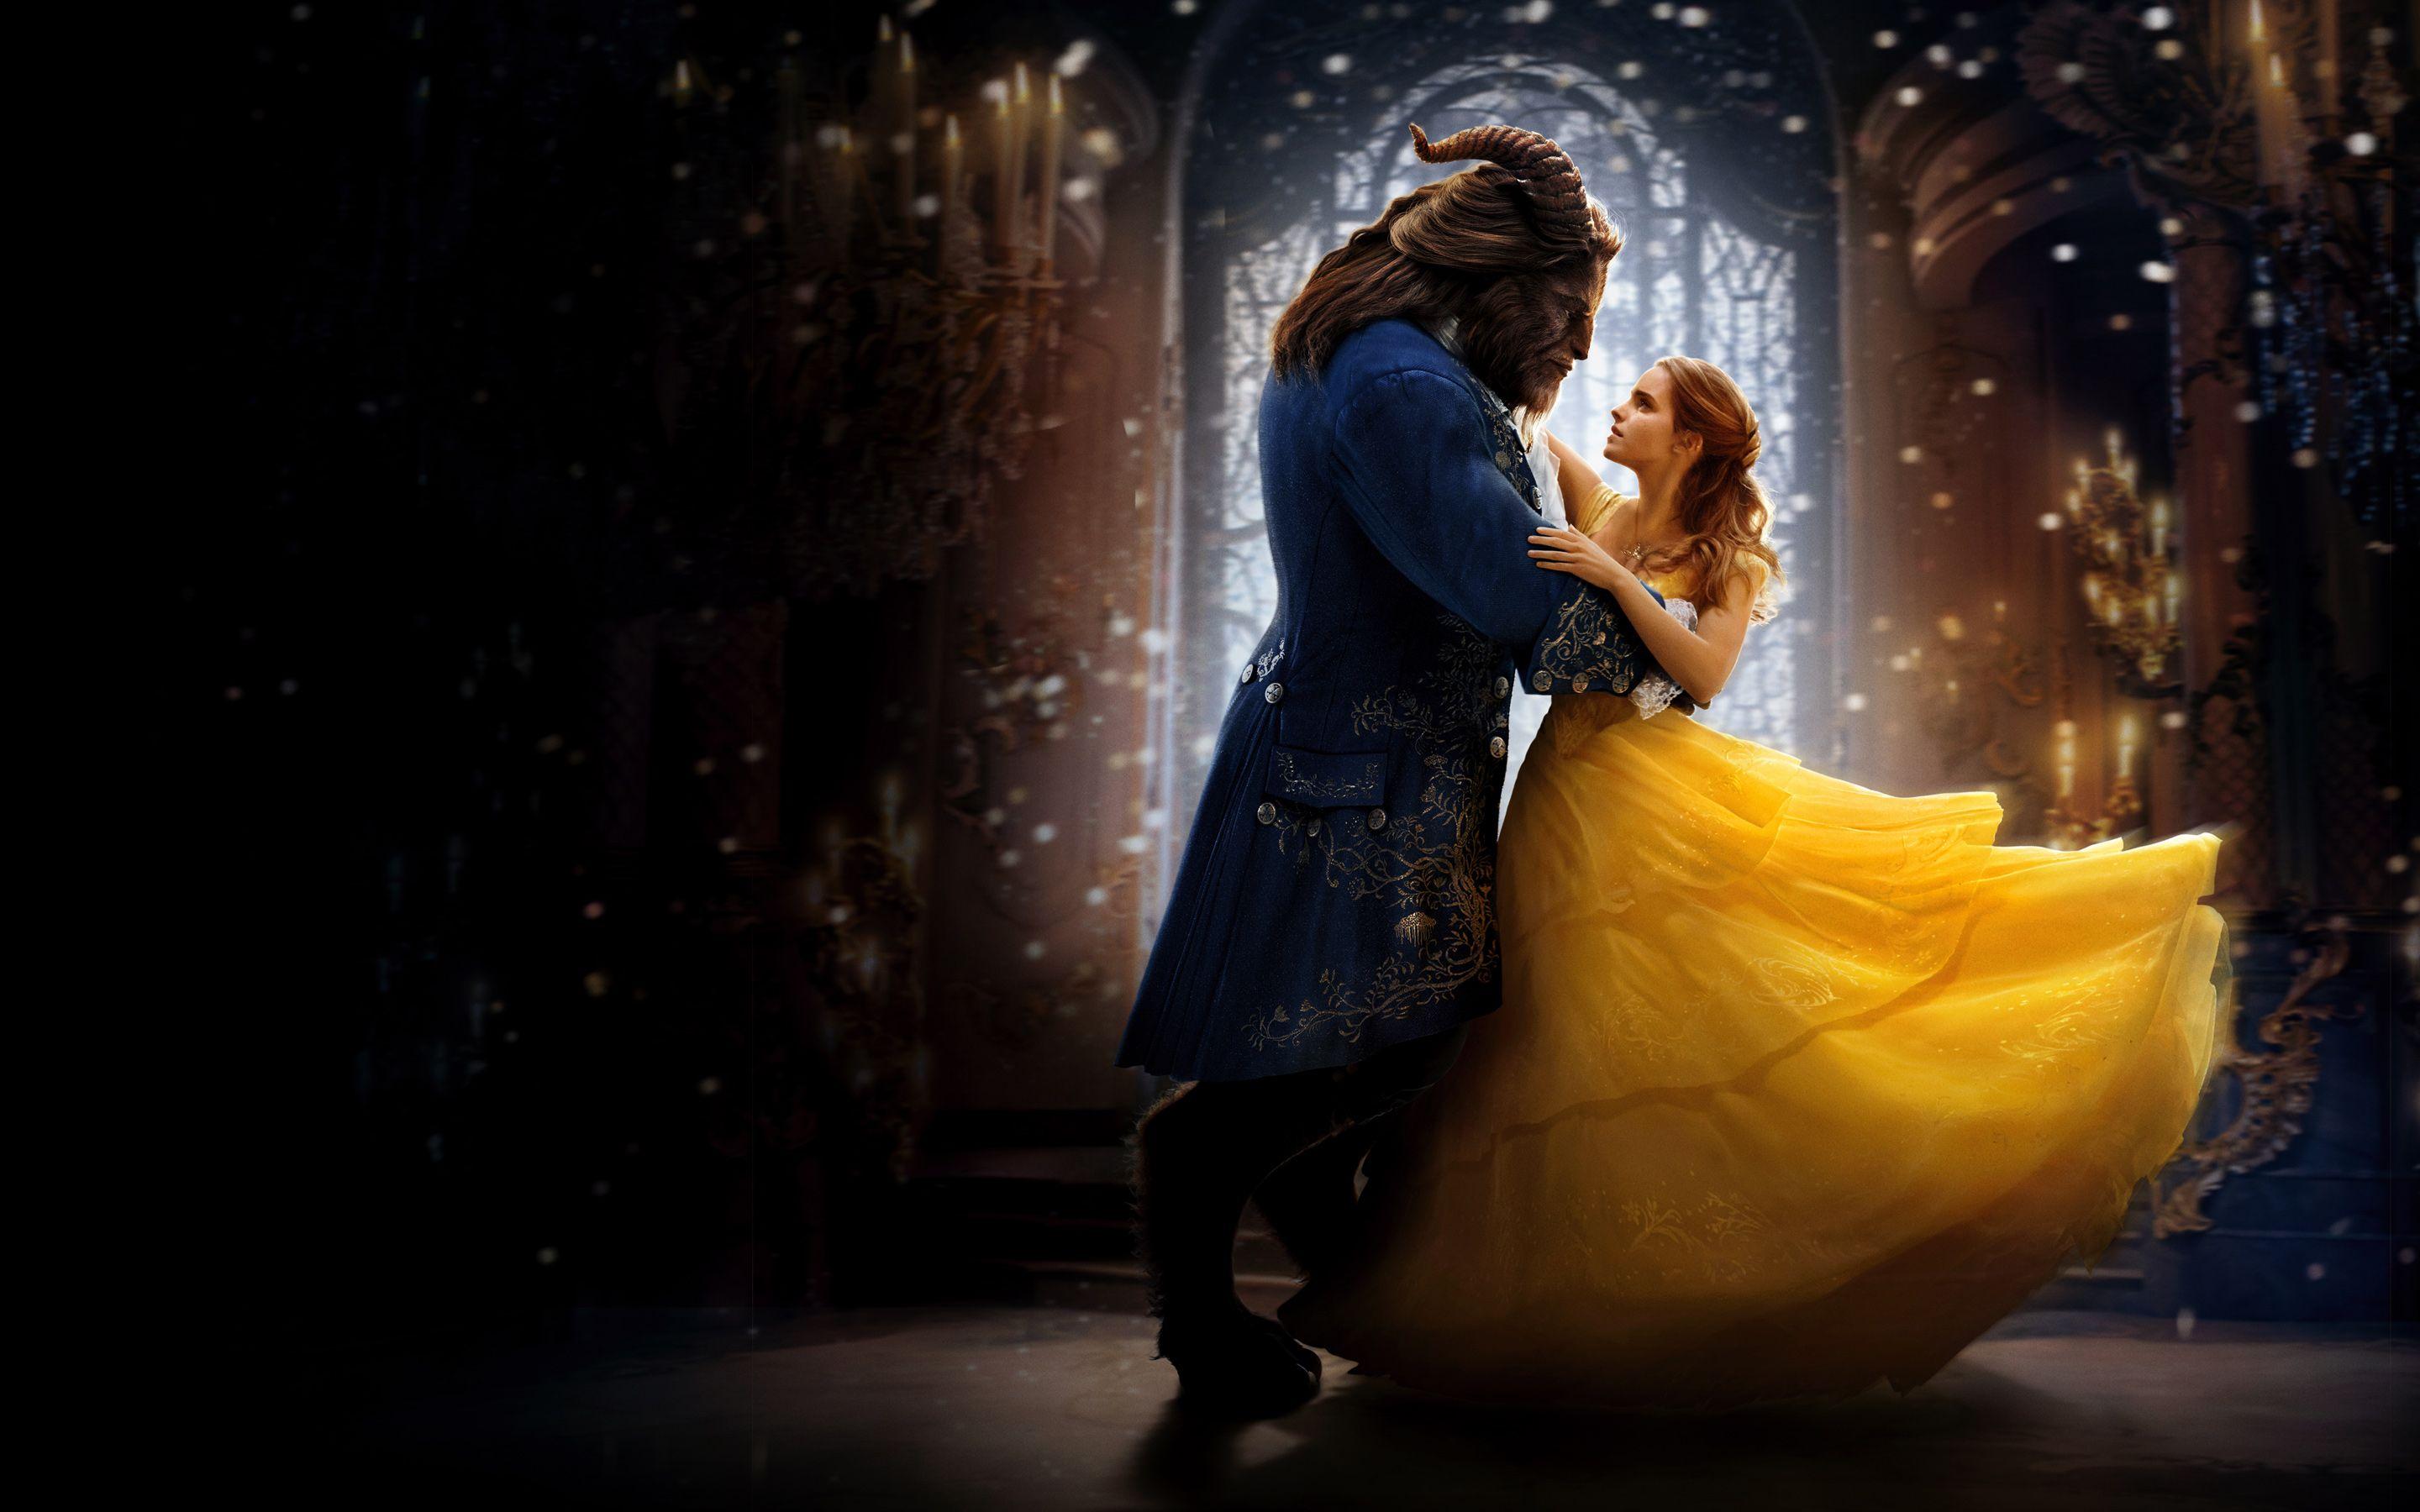 Beauty and the Beast 2017 4K 8K Wallpaper